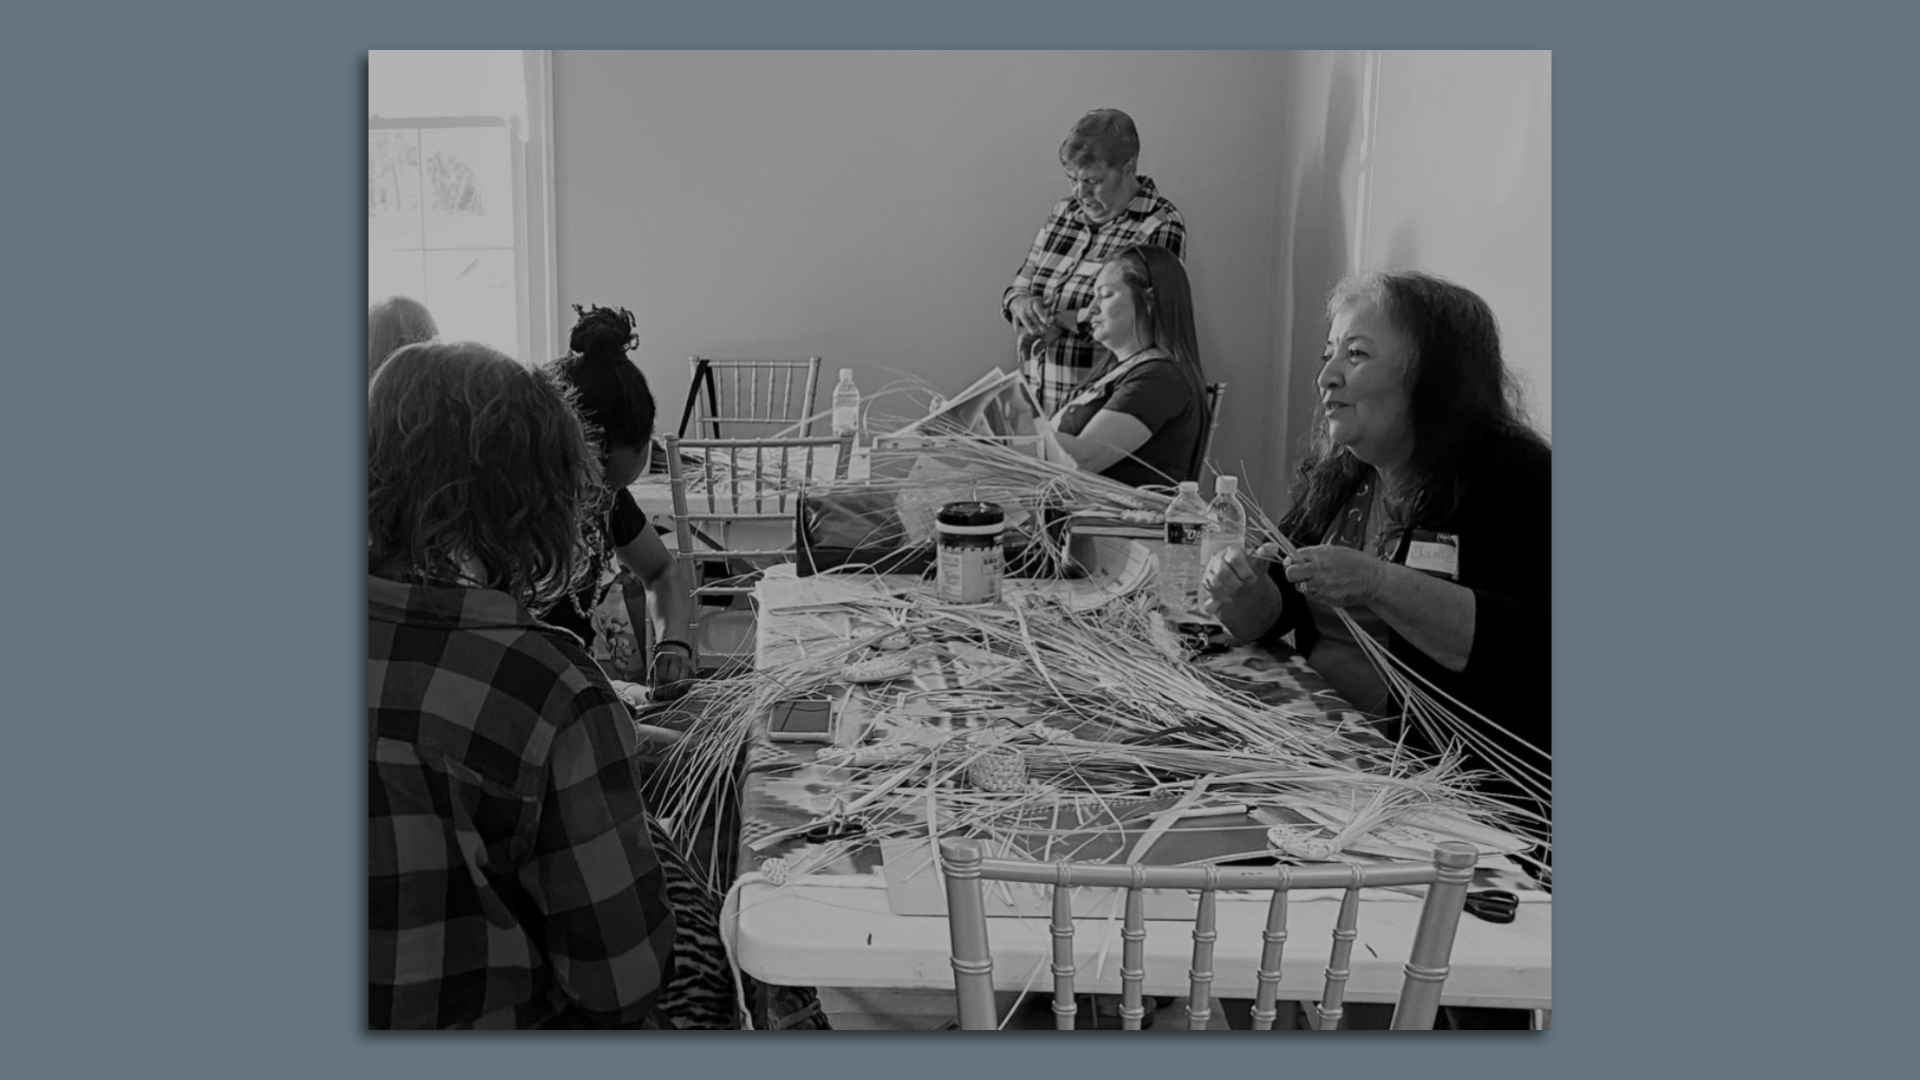 Several people gather around a large white table to weave baskets together. Janie Luster is seen at right.